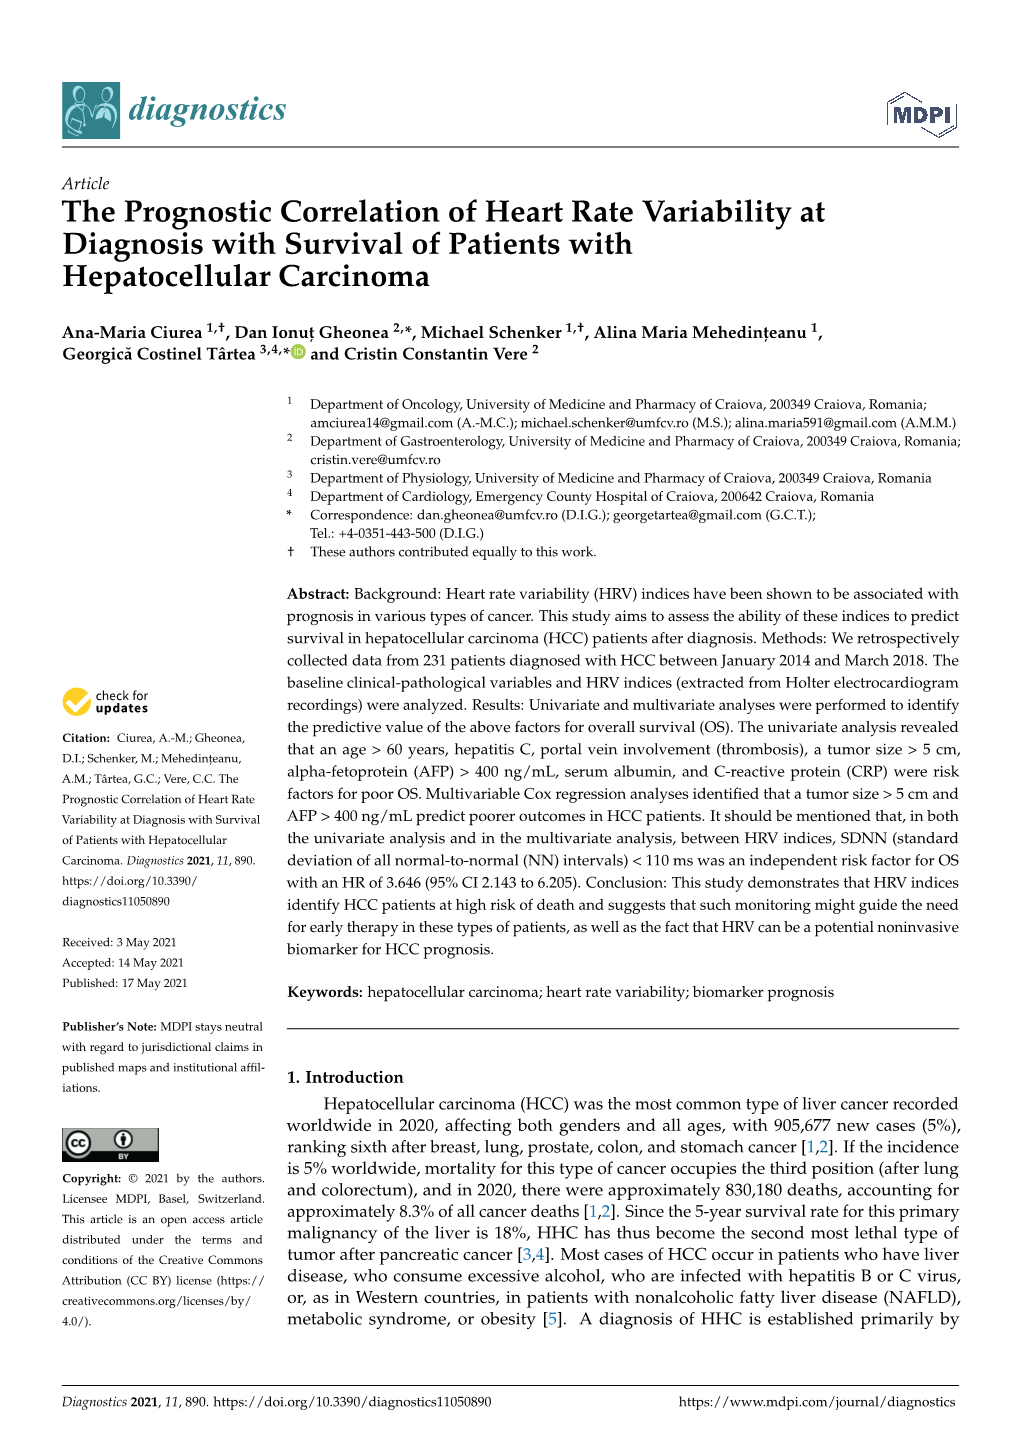 The Prognostic Correlation of Heart Rate Variability at Diagnosis with Survival of Patients with Hepatocellular Carcinoma